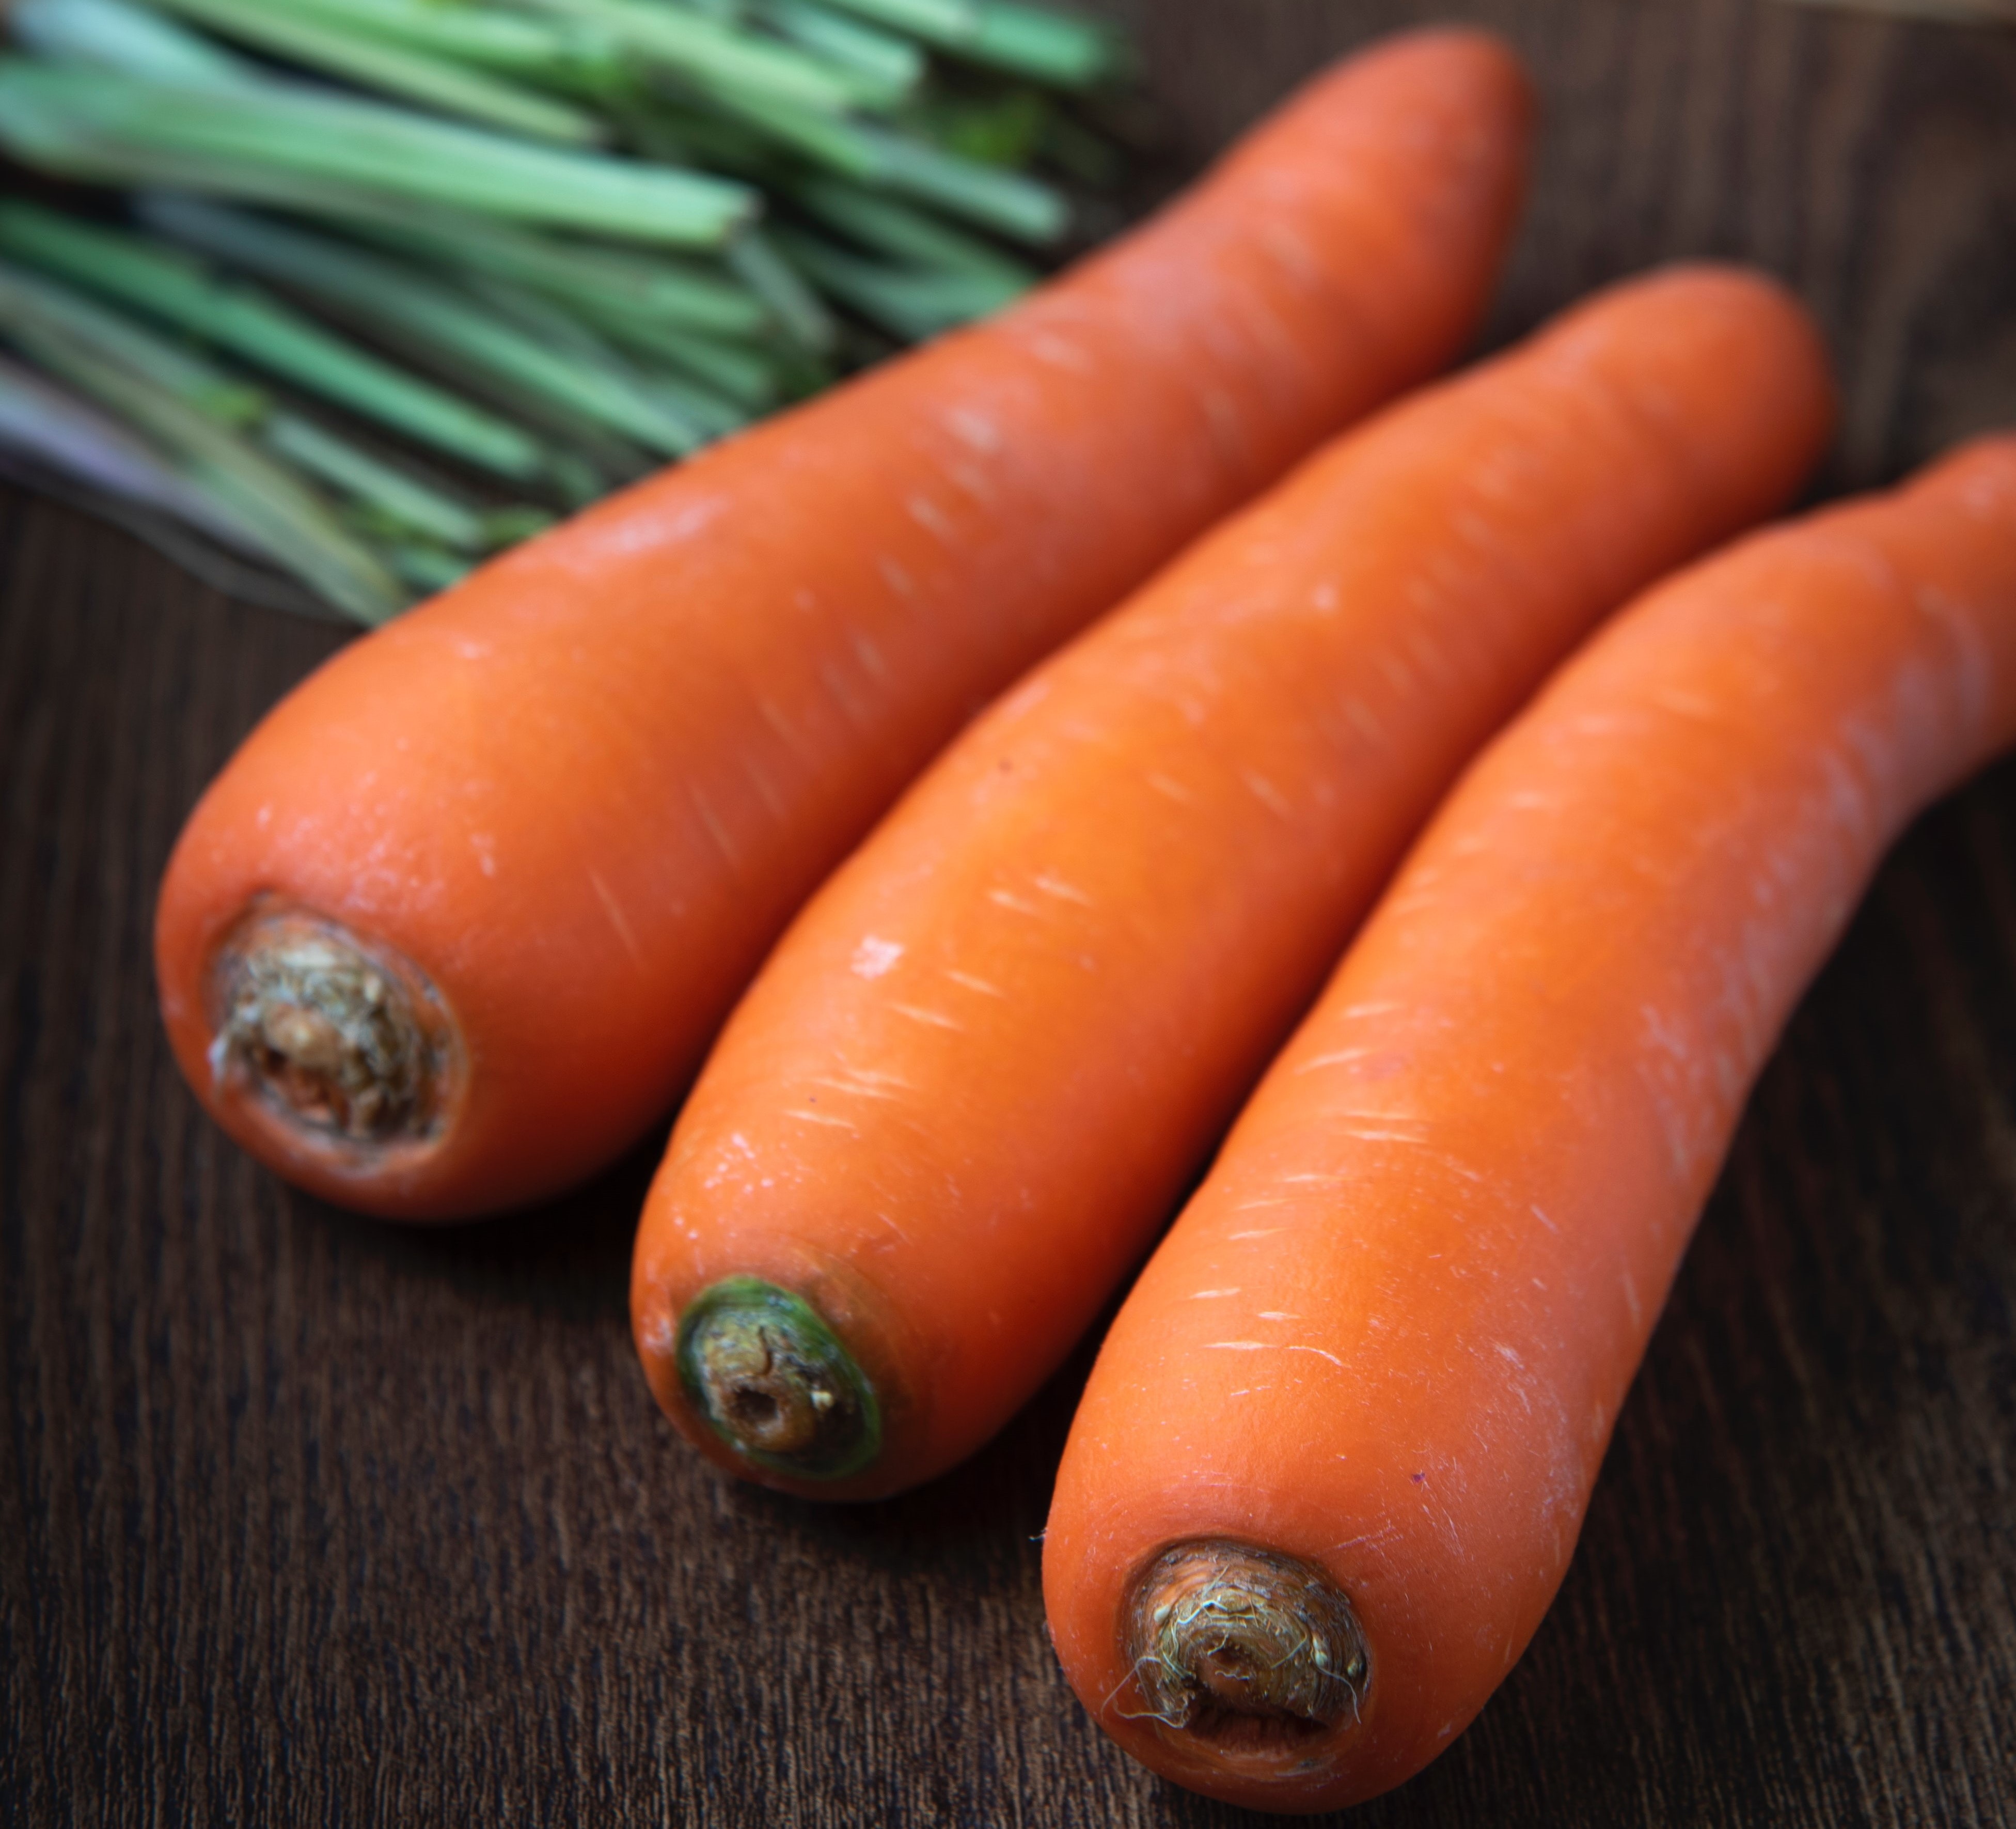 Is Carrot Good For Your Eyes